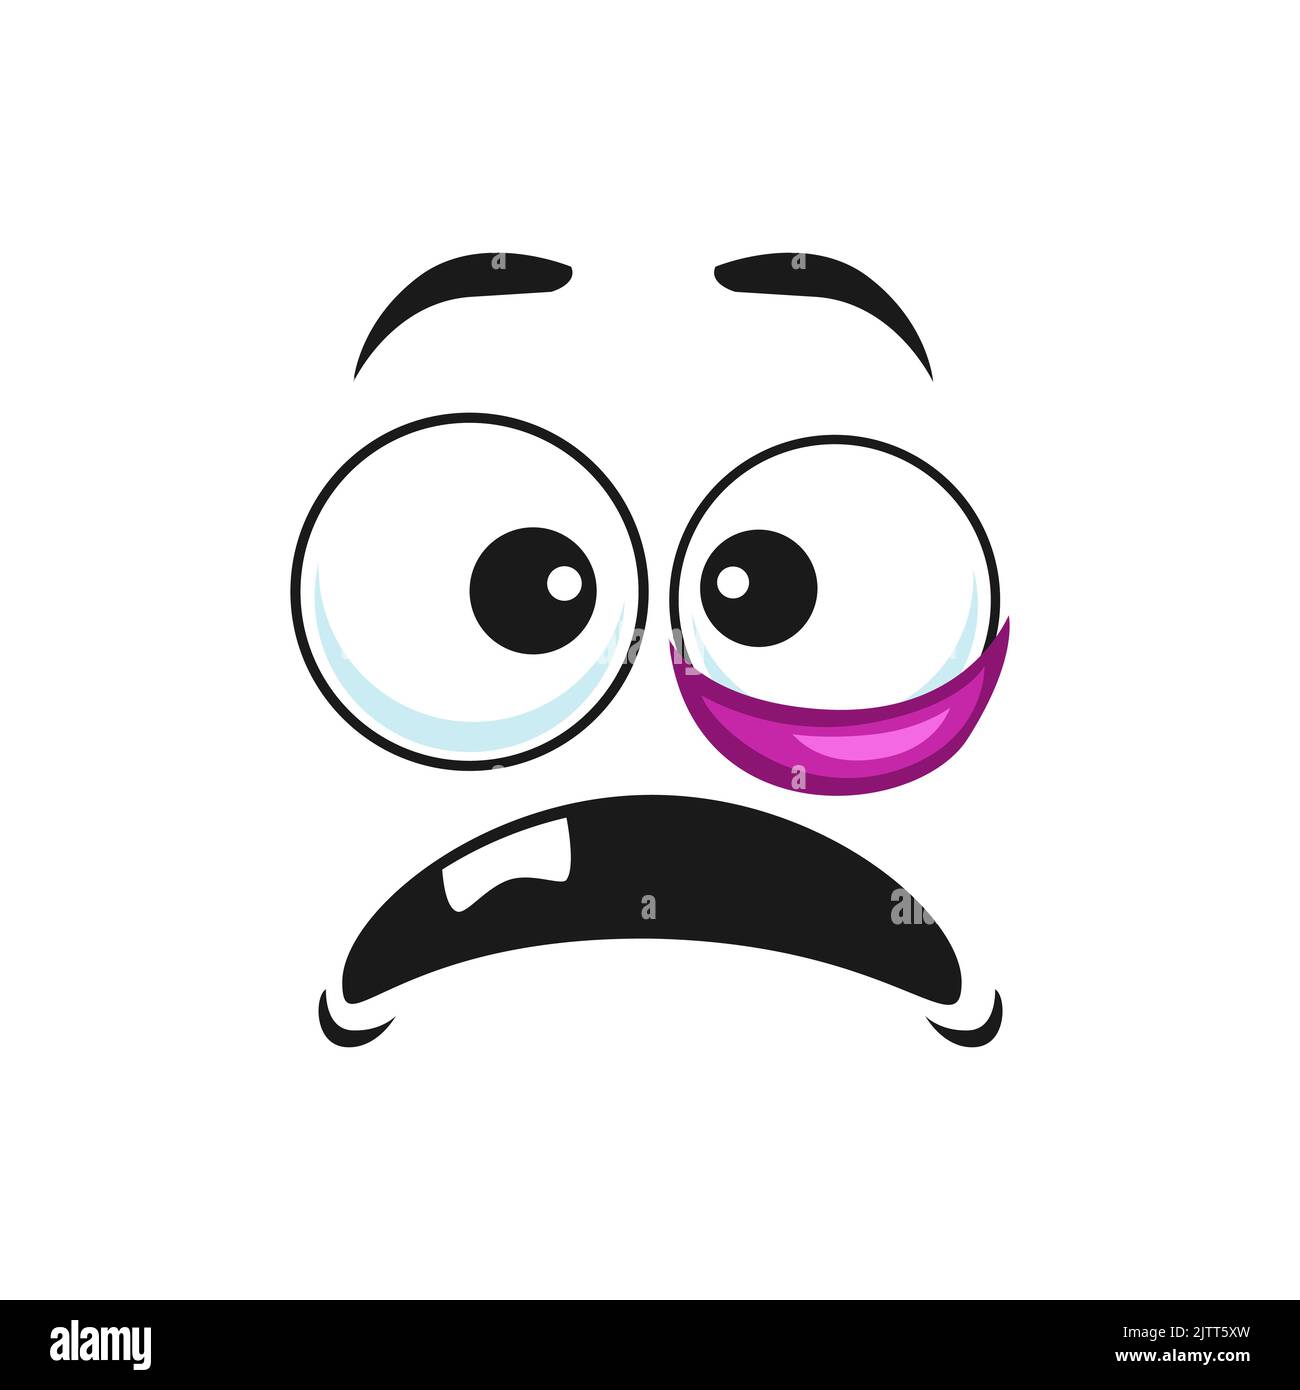 Mouth+bruise Stock Vector Images - Alamy